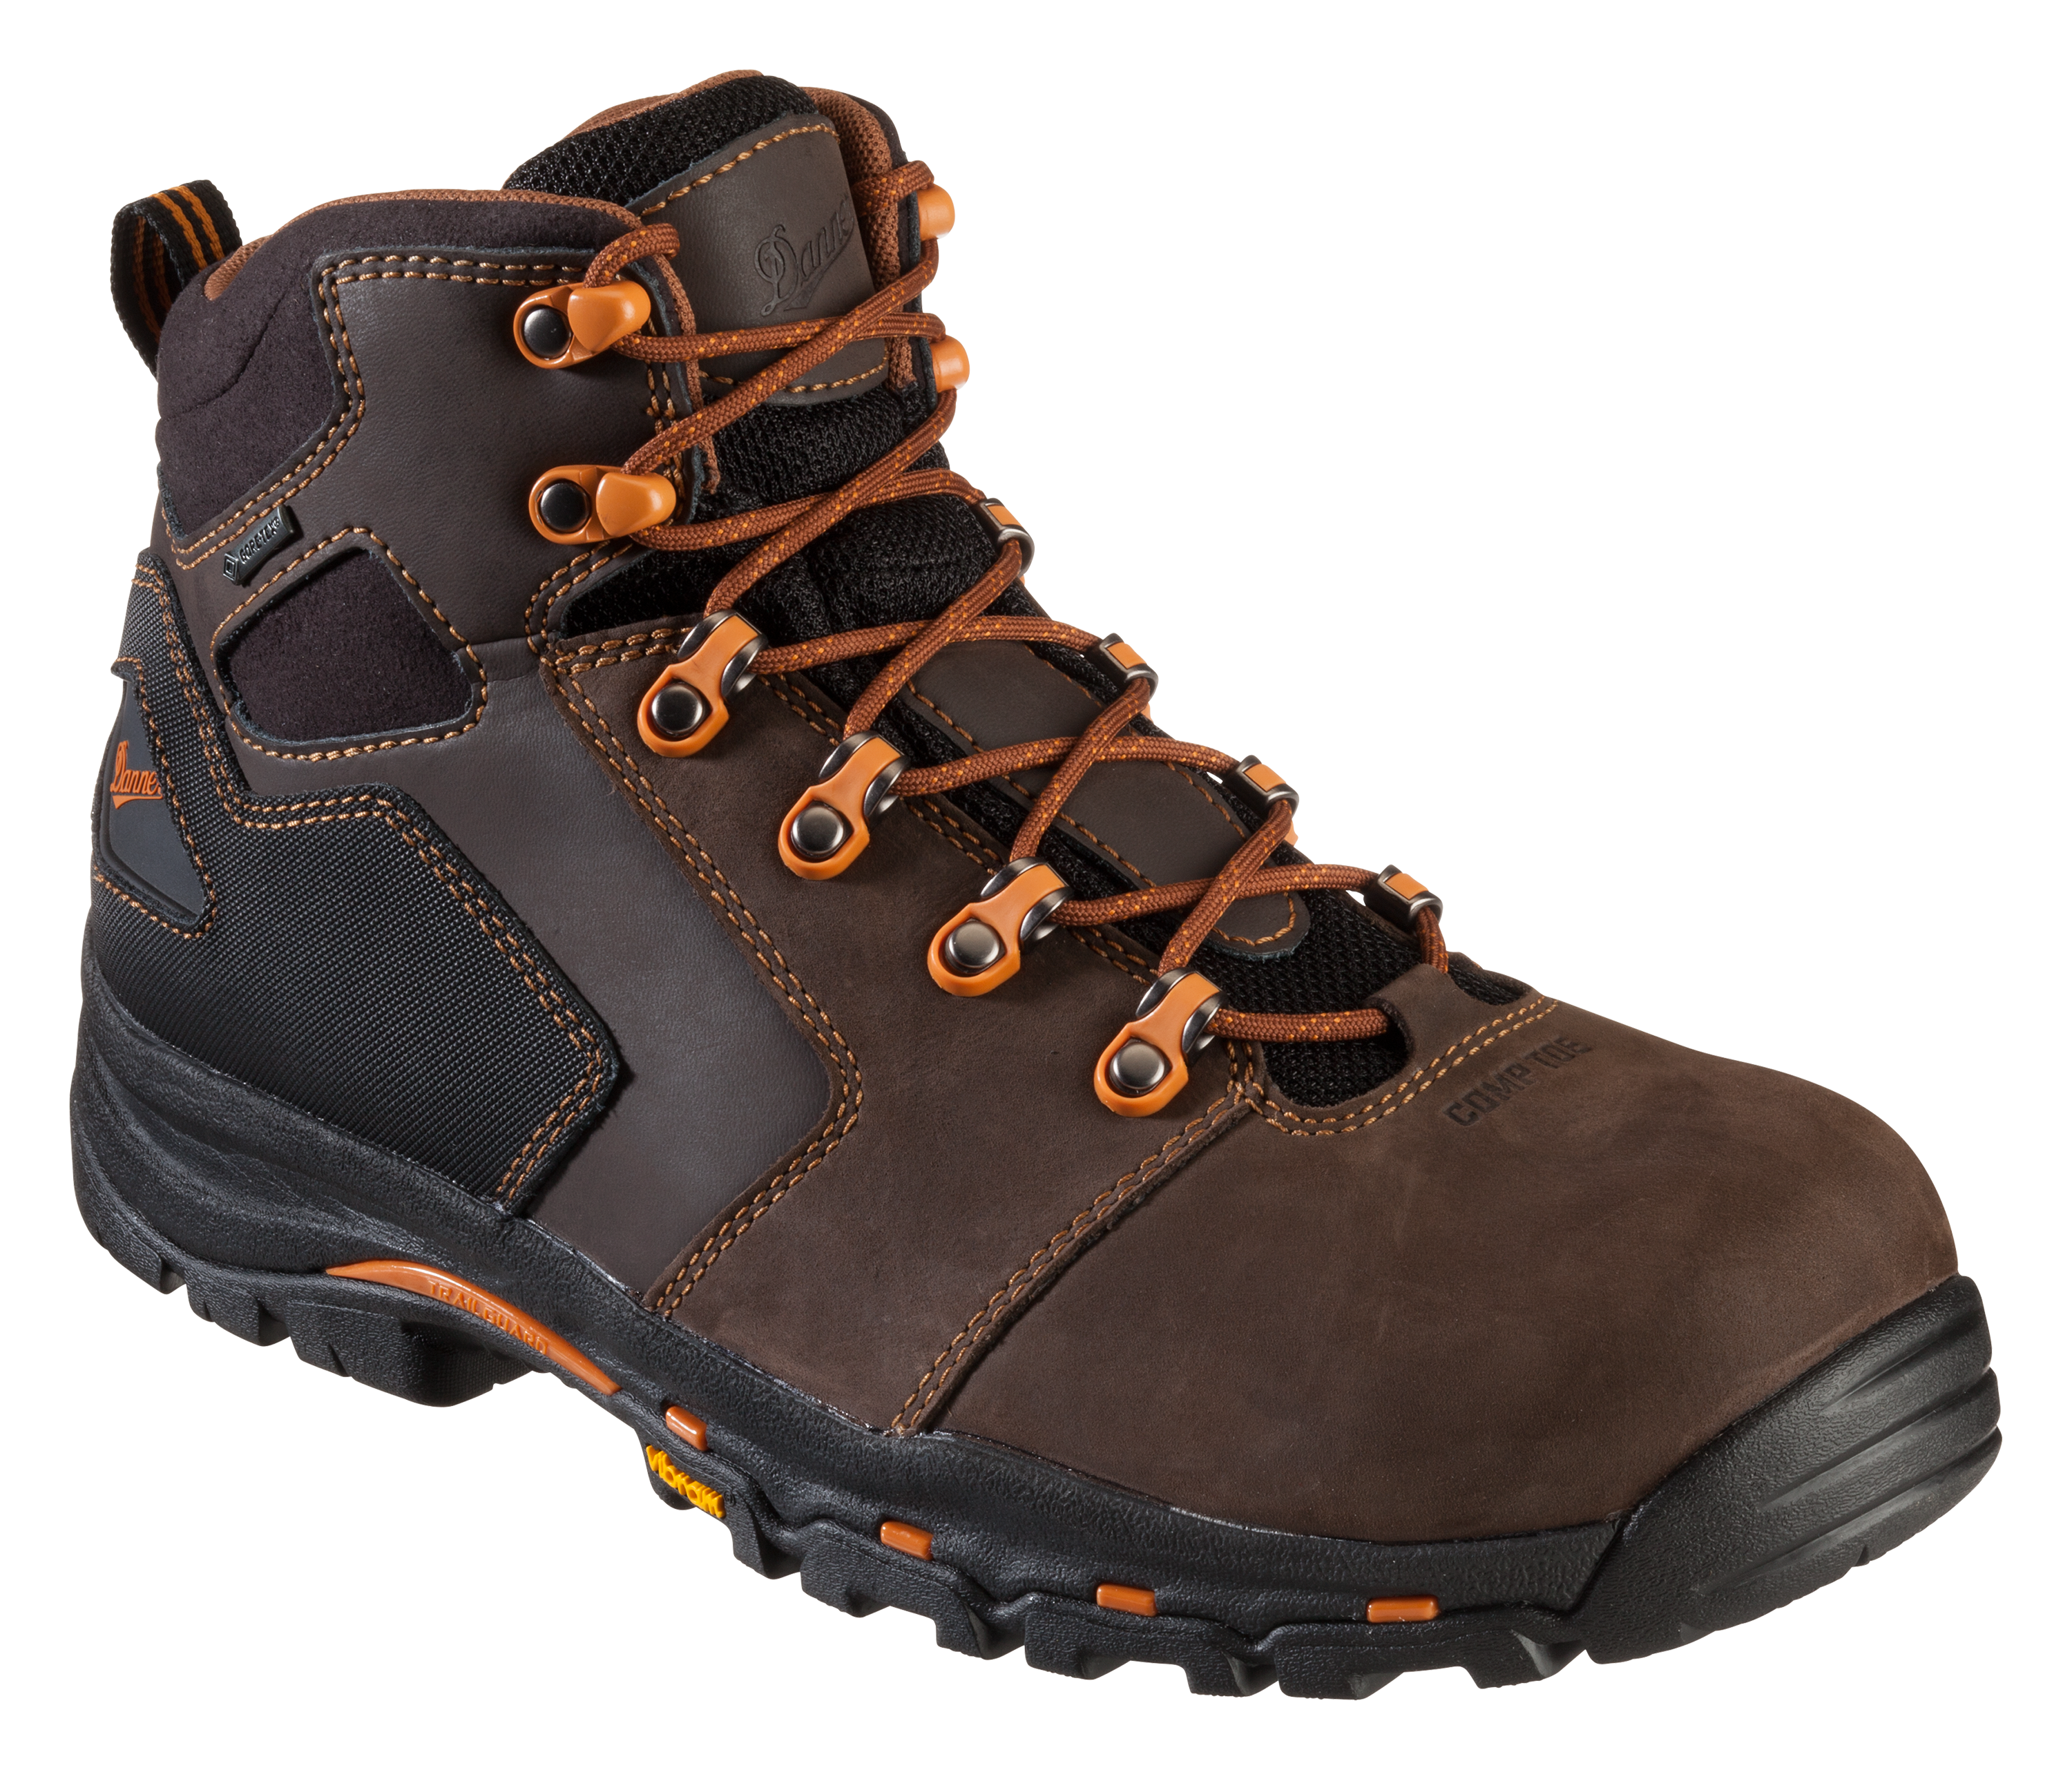 Danner Vicious GORE-TEX Non-Metallic Safety Toe Work Boots for Men - Brown - 8.5M